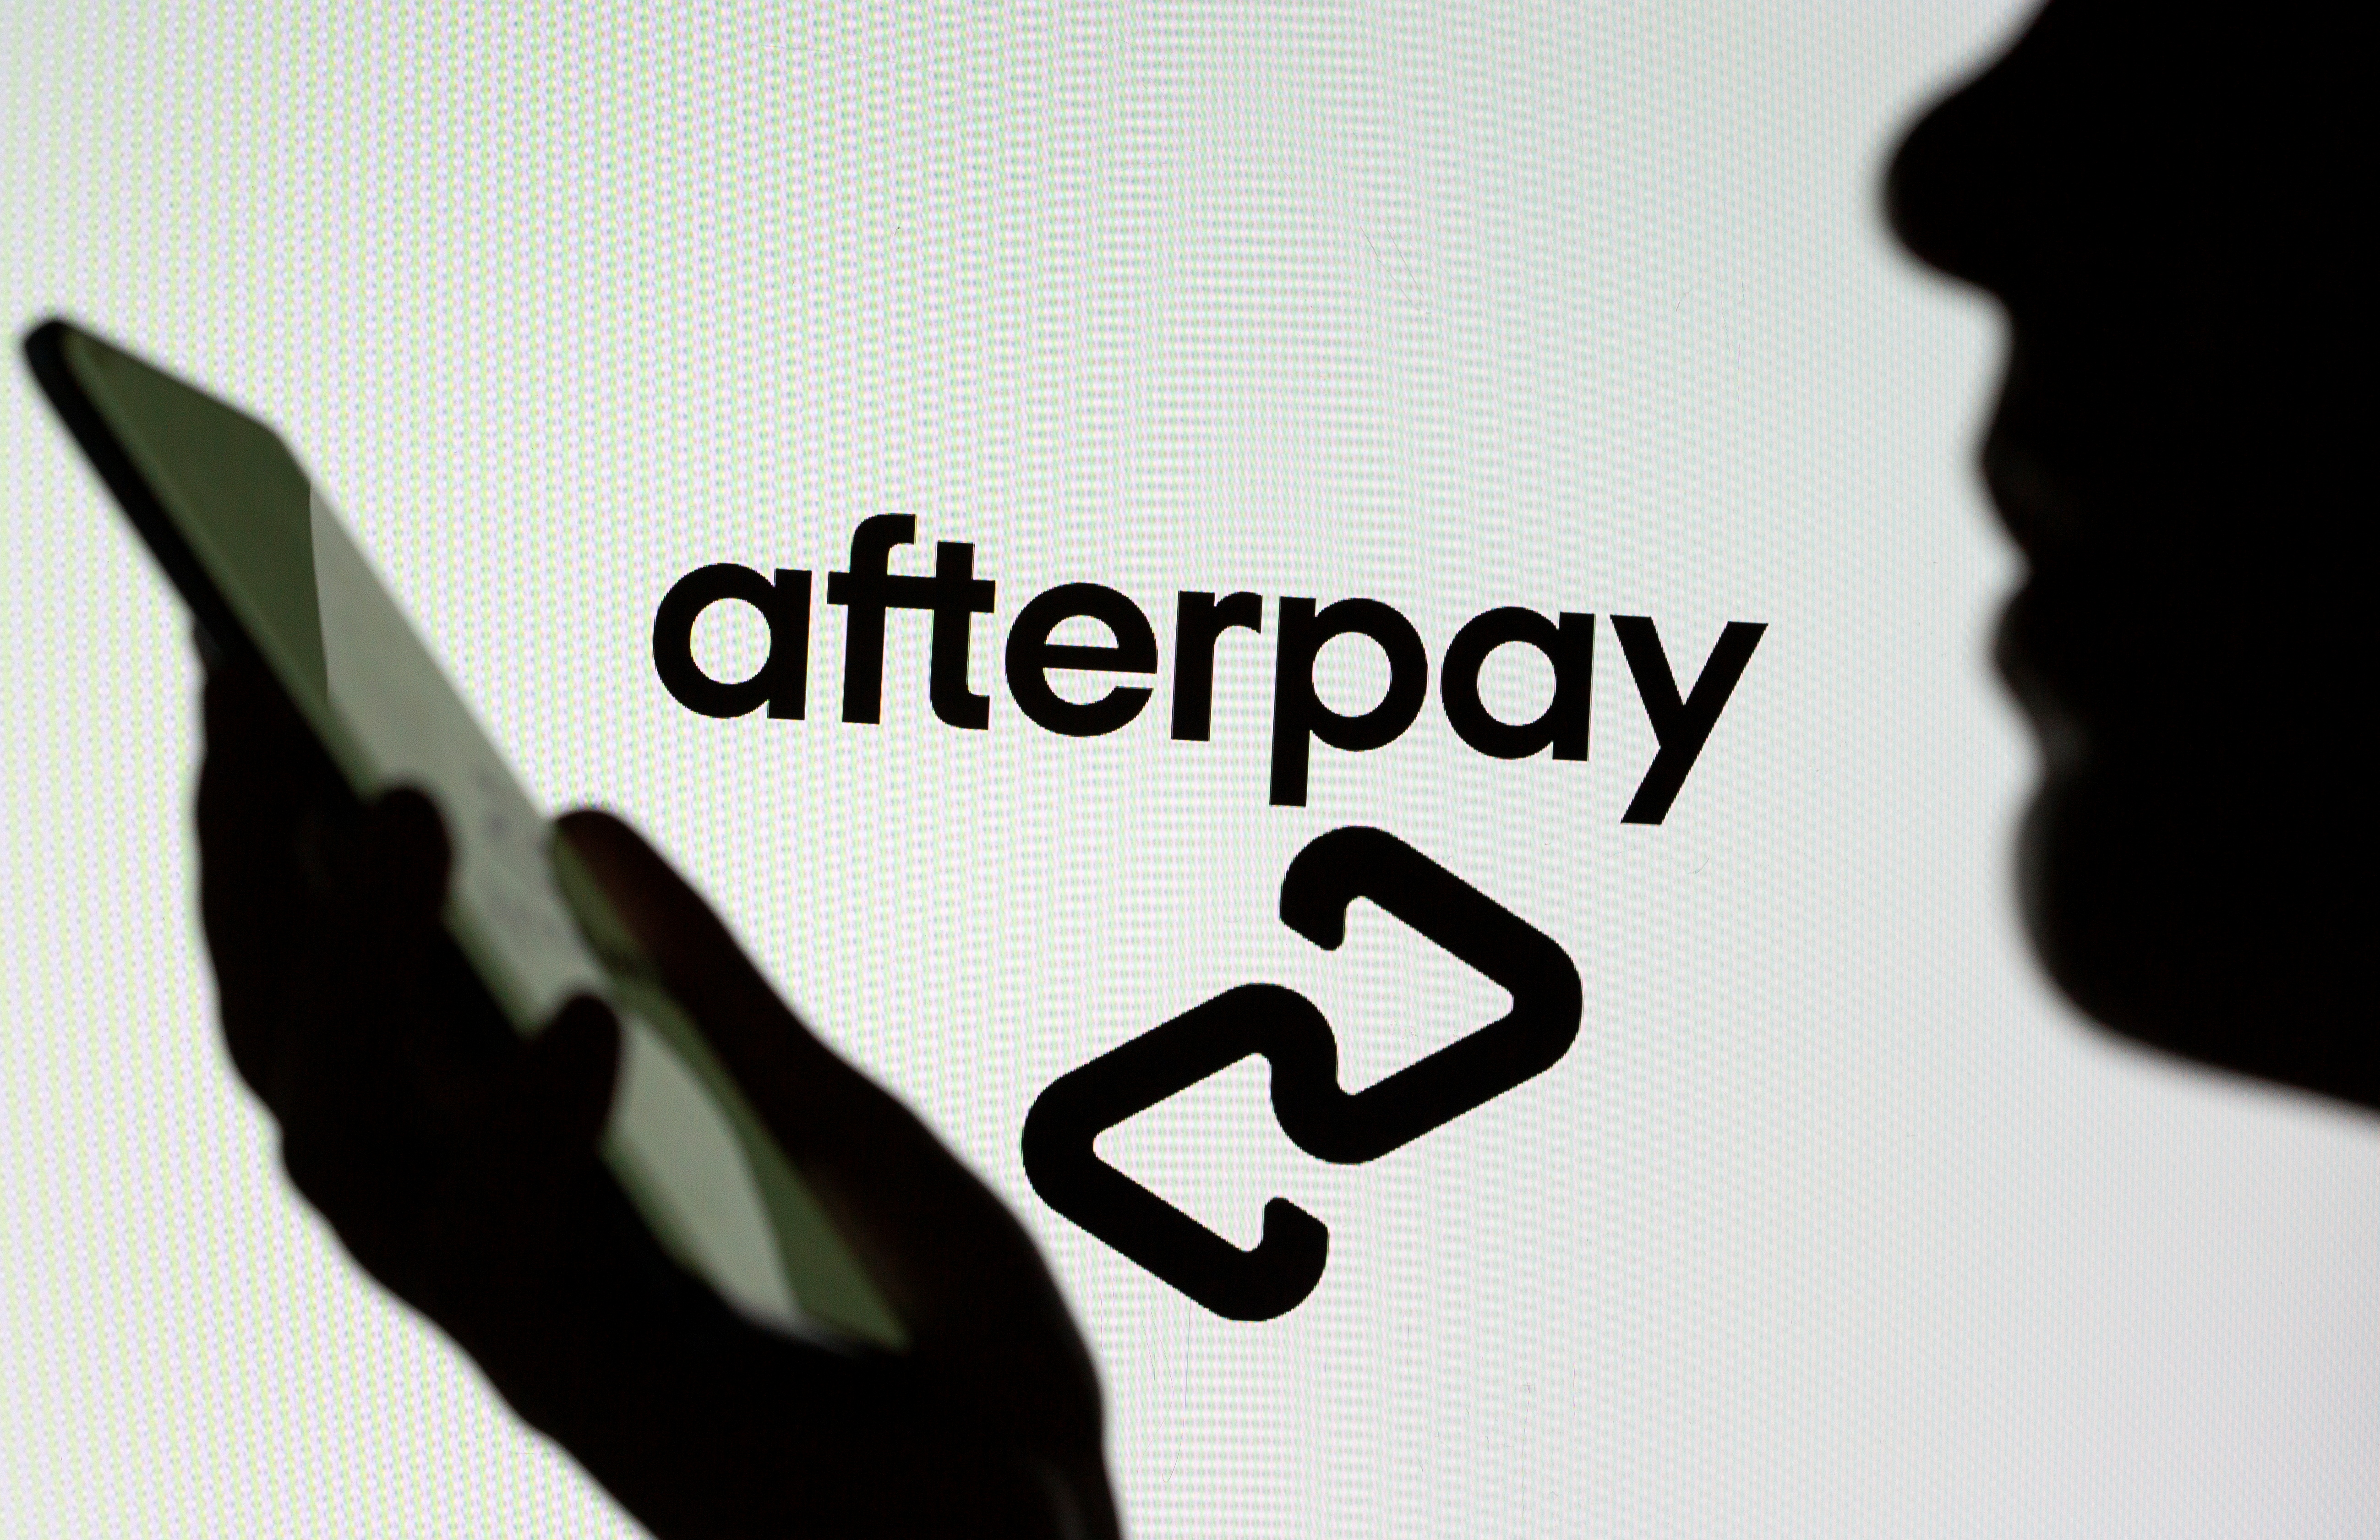 Twitter's Dorsey leads $29 bln buyout of lending pioneer Afterpay